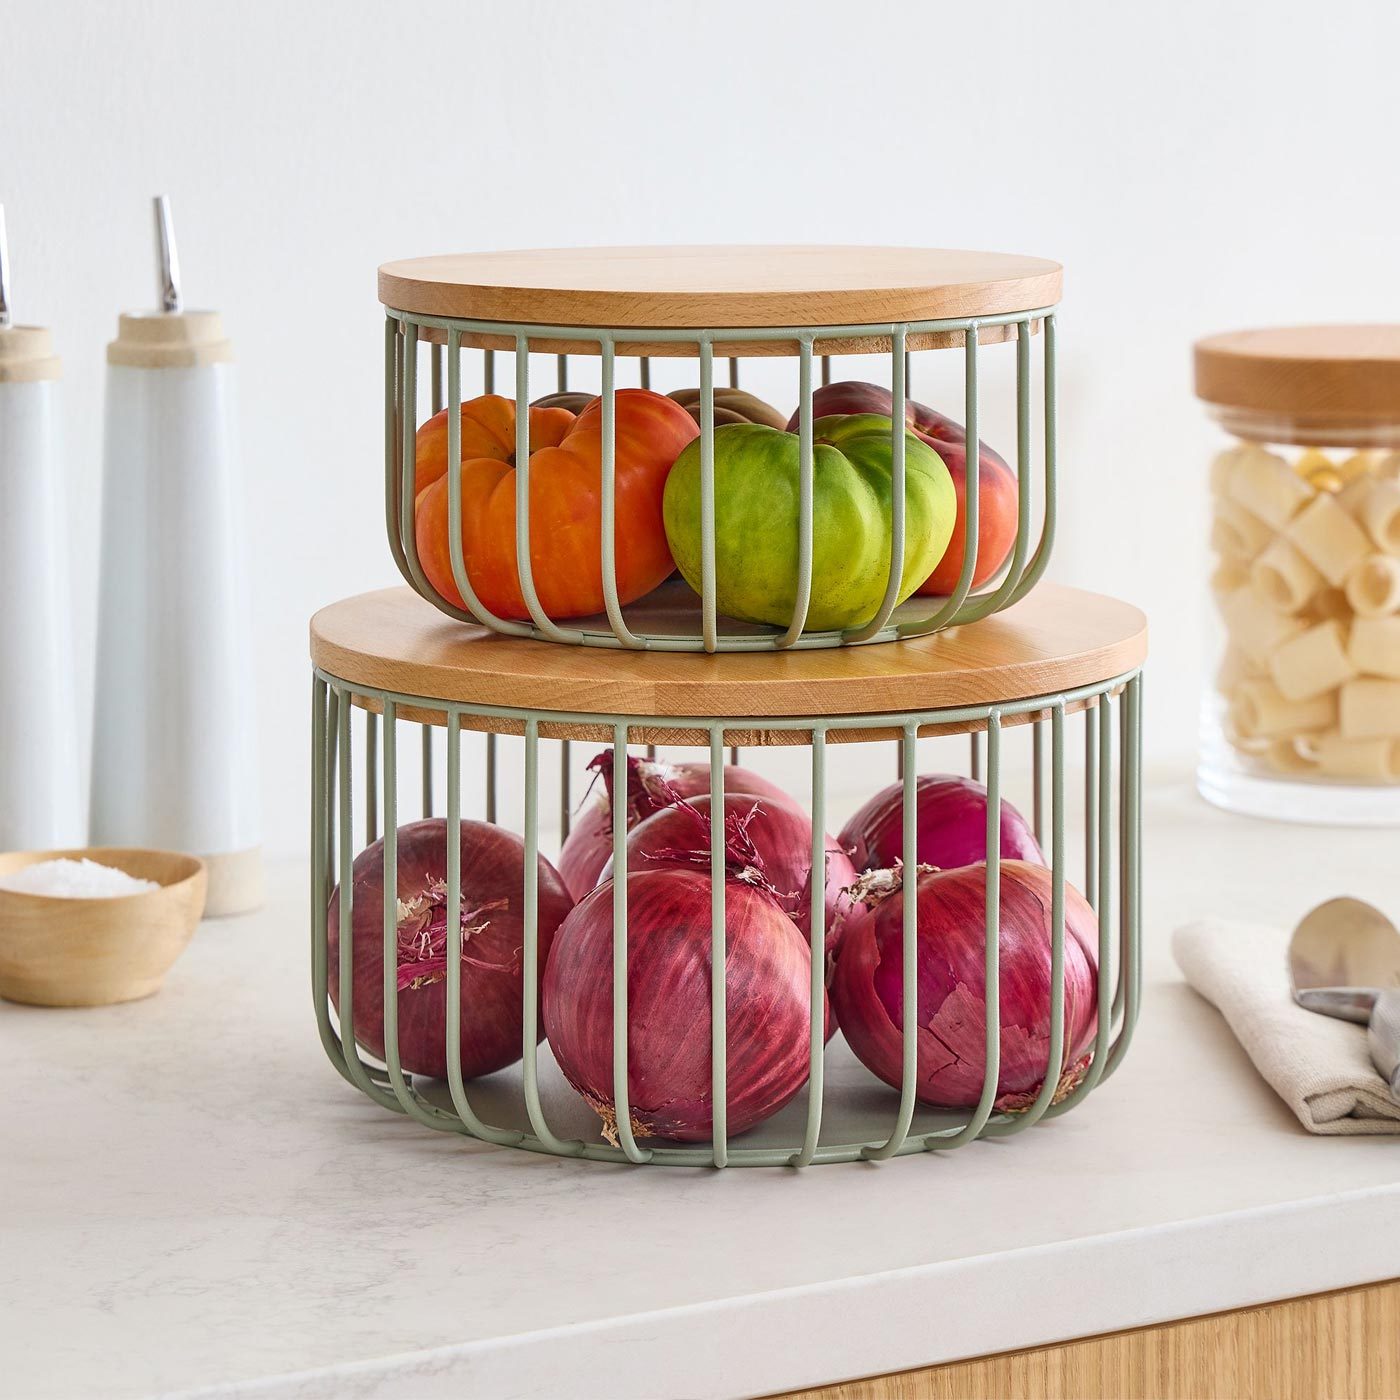 How to store fruits and vegetables: Produce storage ideas